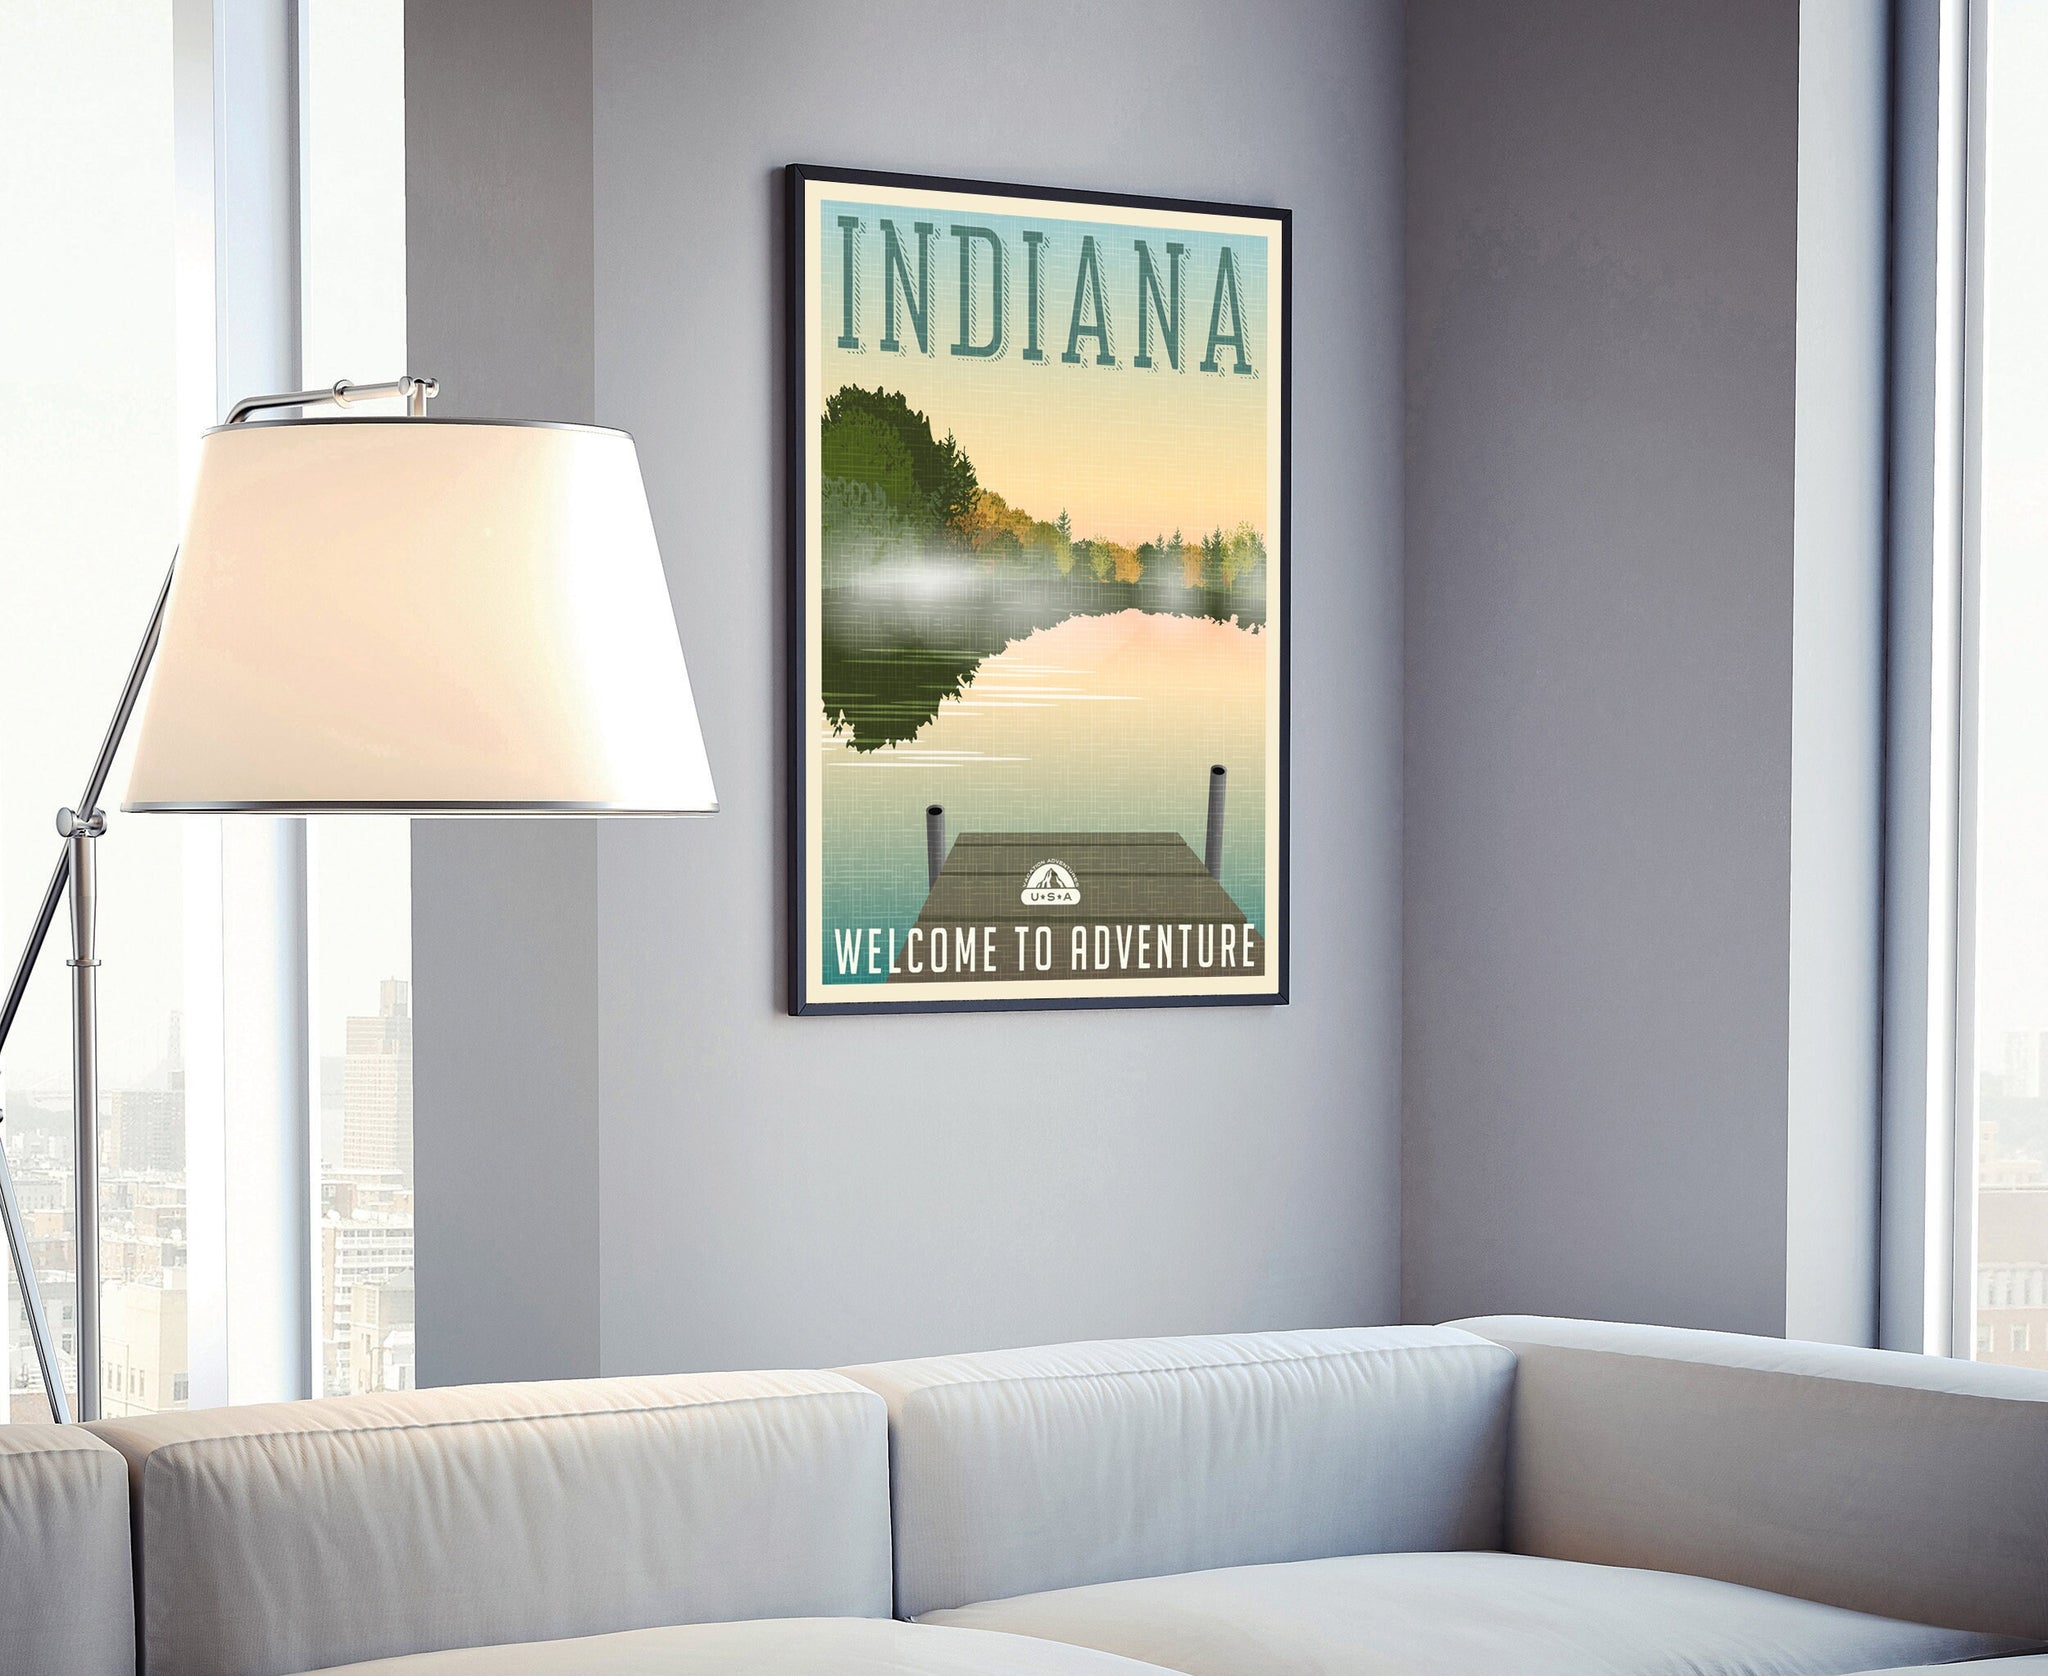 INDIANA retro style travel poster, Vintage rustic poster print, Home wall art, Office poster wall decorations, Indiana state map poster